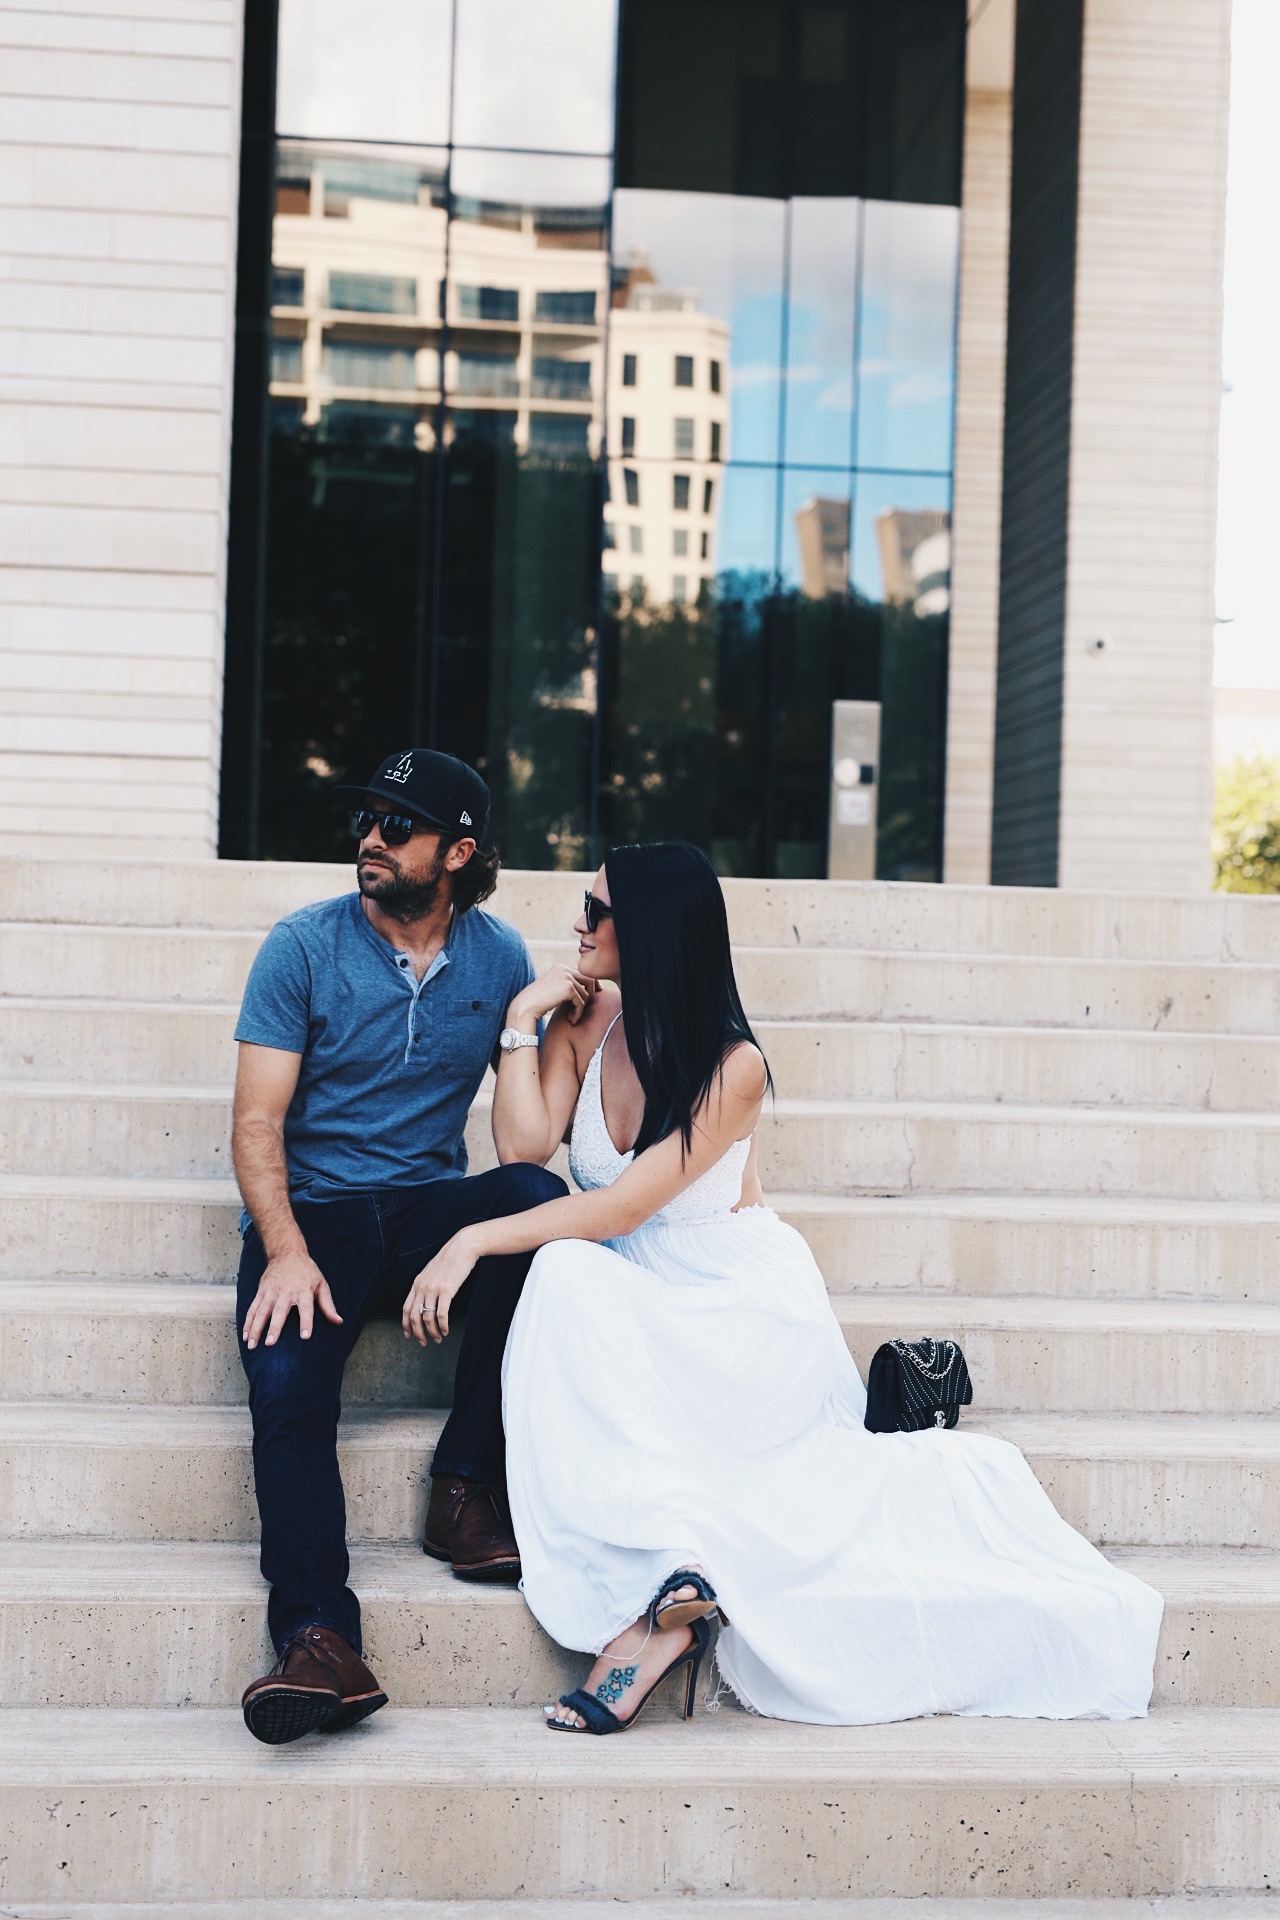 Austin Blogger DTKAustin's husband is spilling the beans on what it's like being an Instagram Husband and being married to a fashion blogger and stylist. | anniversary photo ideas | styling for an anniversary shoot | anniversary photo shoot fashion tips | what to wear for an anniversary photo shoot | how to style a maxi dress | couples fashion | his and her summer fashion || Dressed to Kill